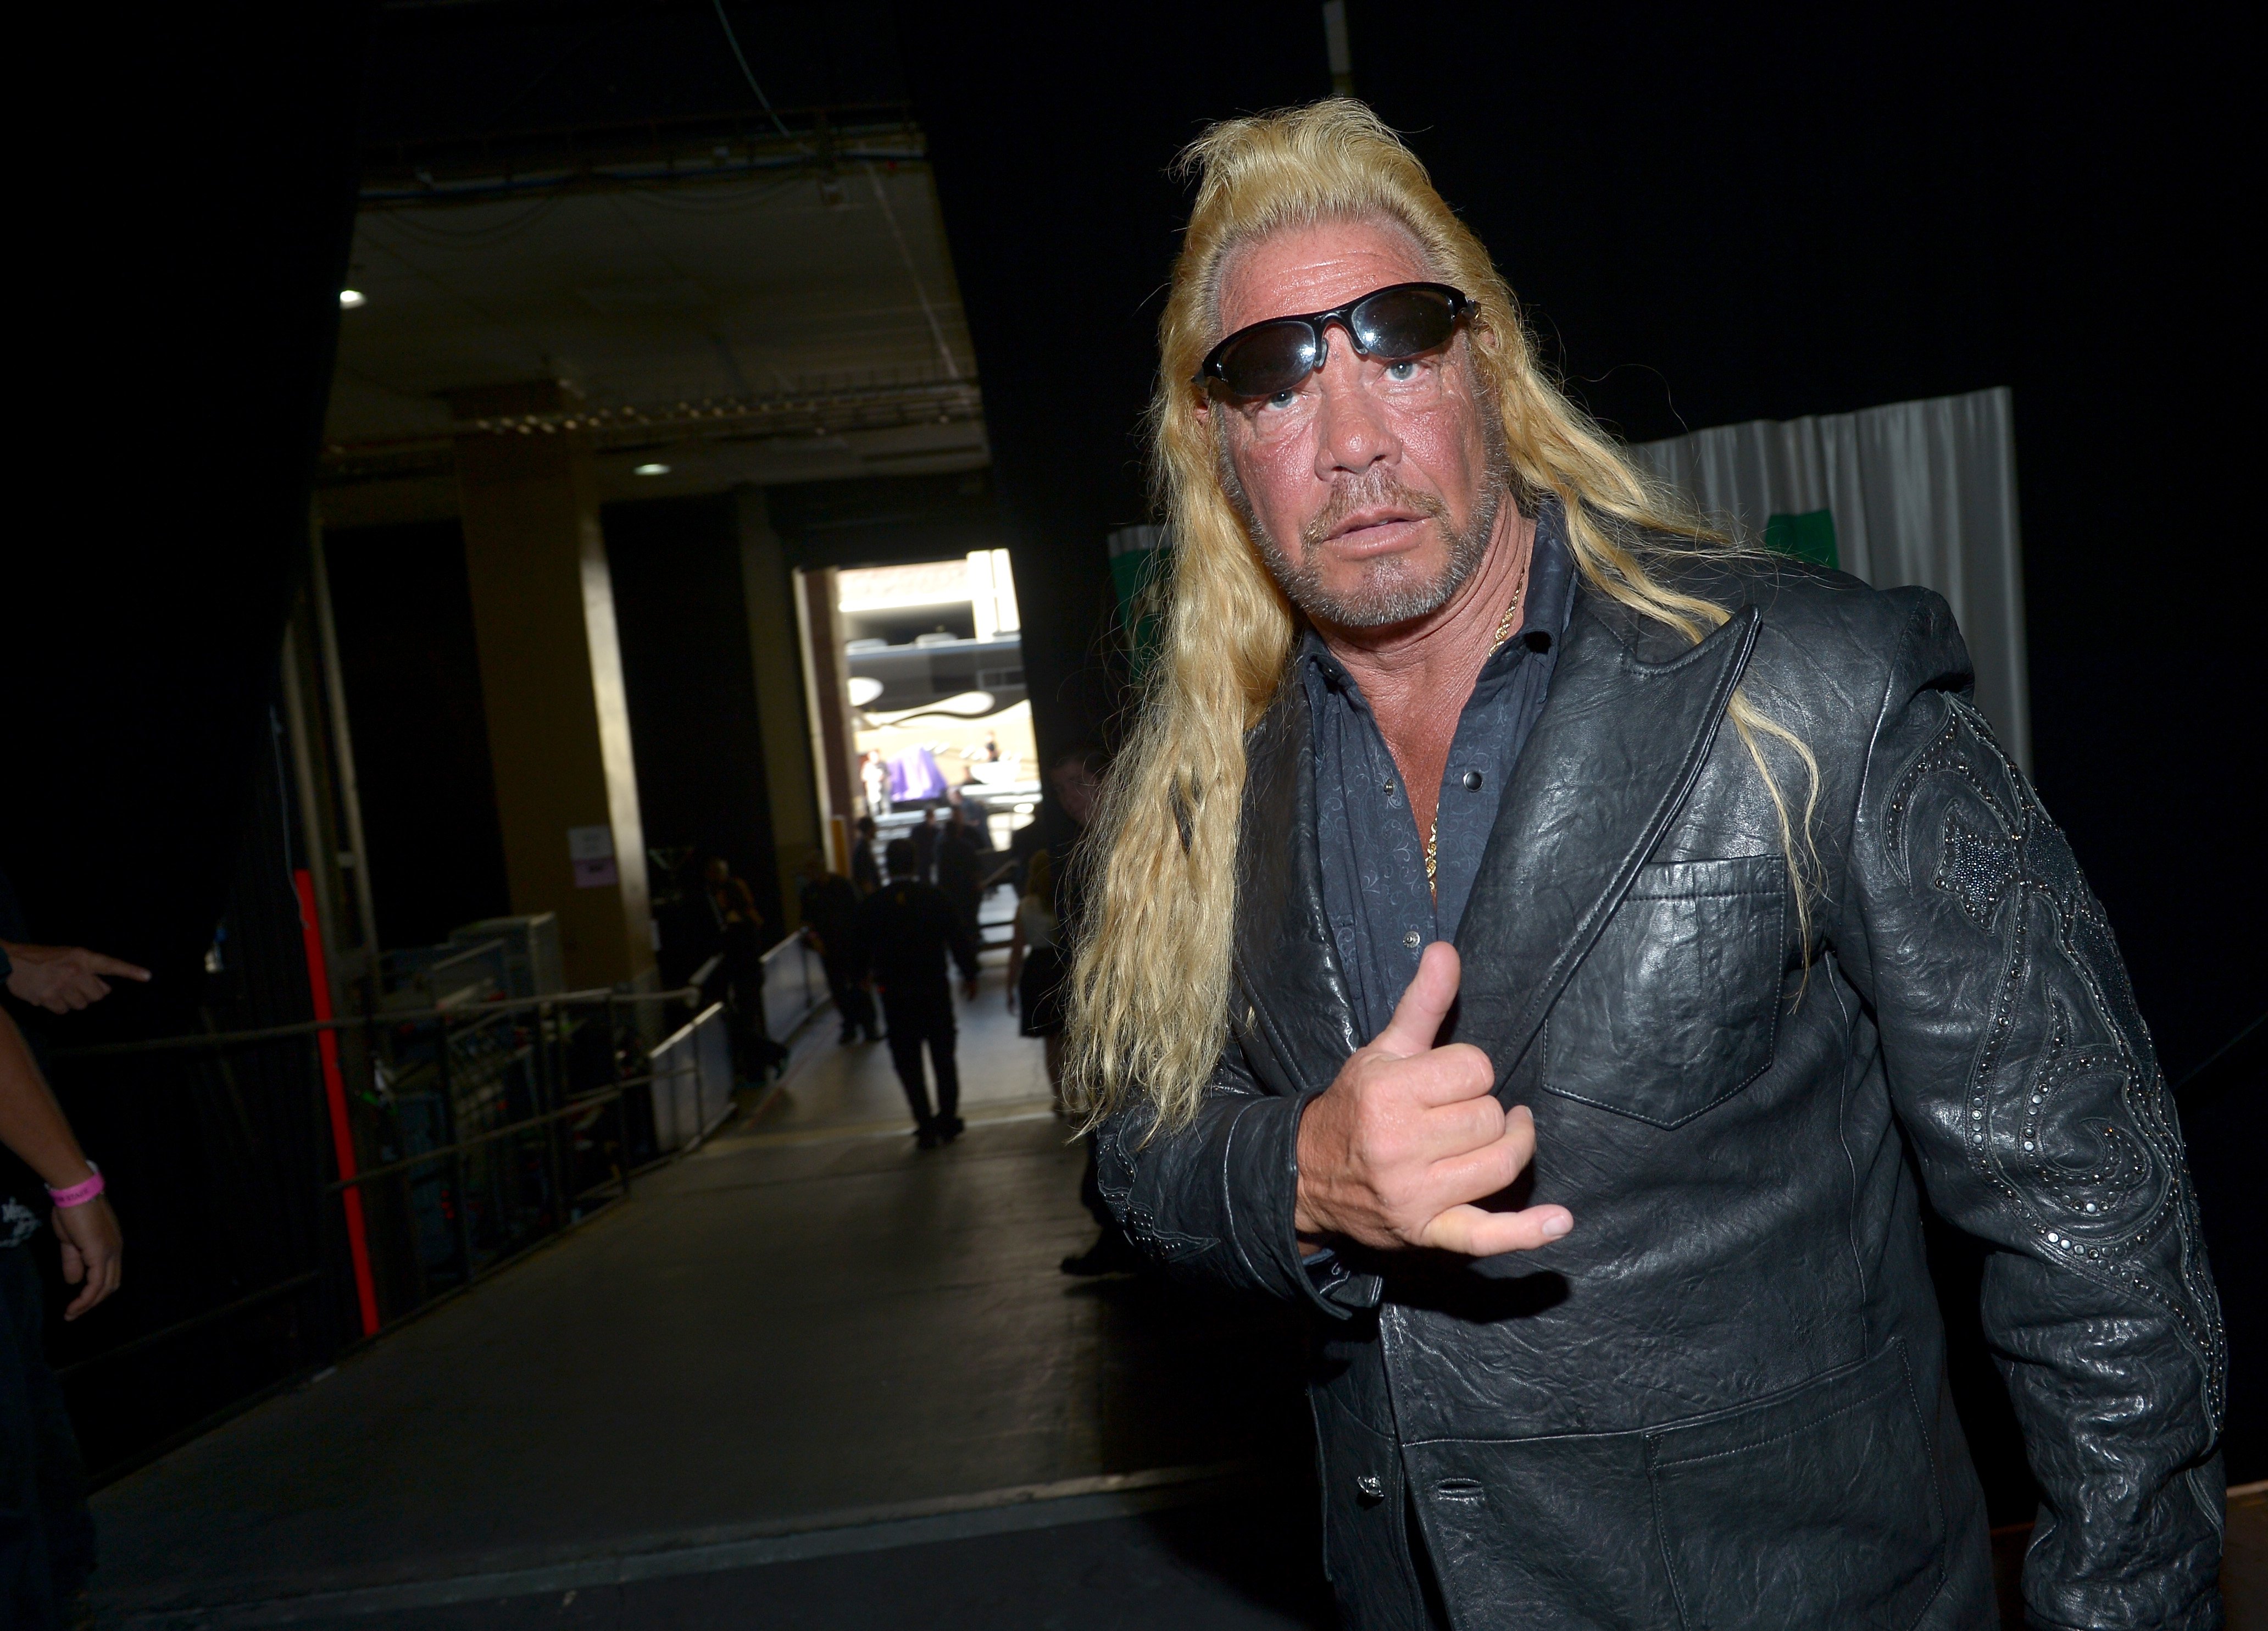 TV personality Dog the Bounty Hunter attends the 48th Annual Academy of Country Music Awards at the MGM Grand Garden Arena on April 7, 2013 | Source: Getty Images